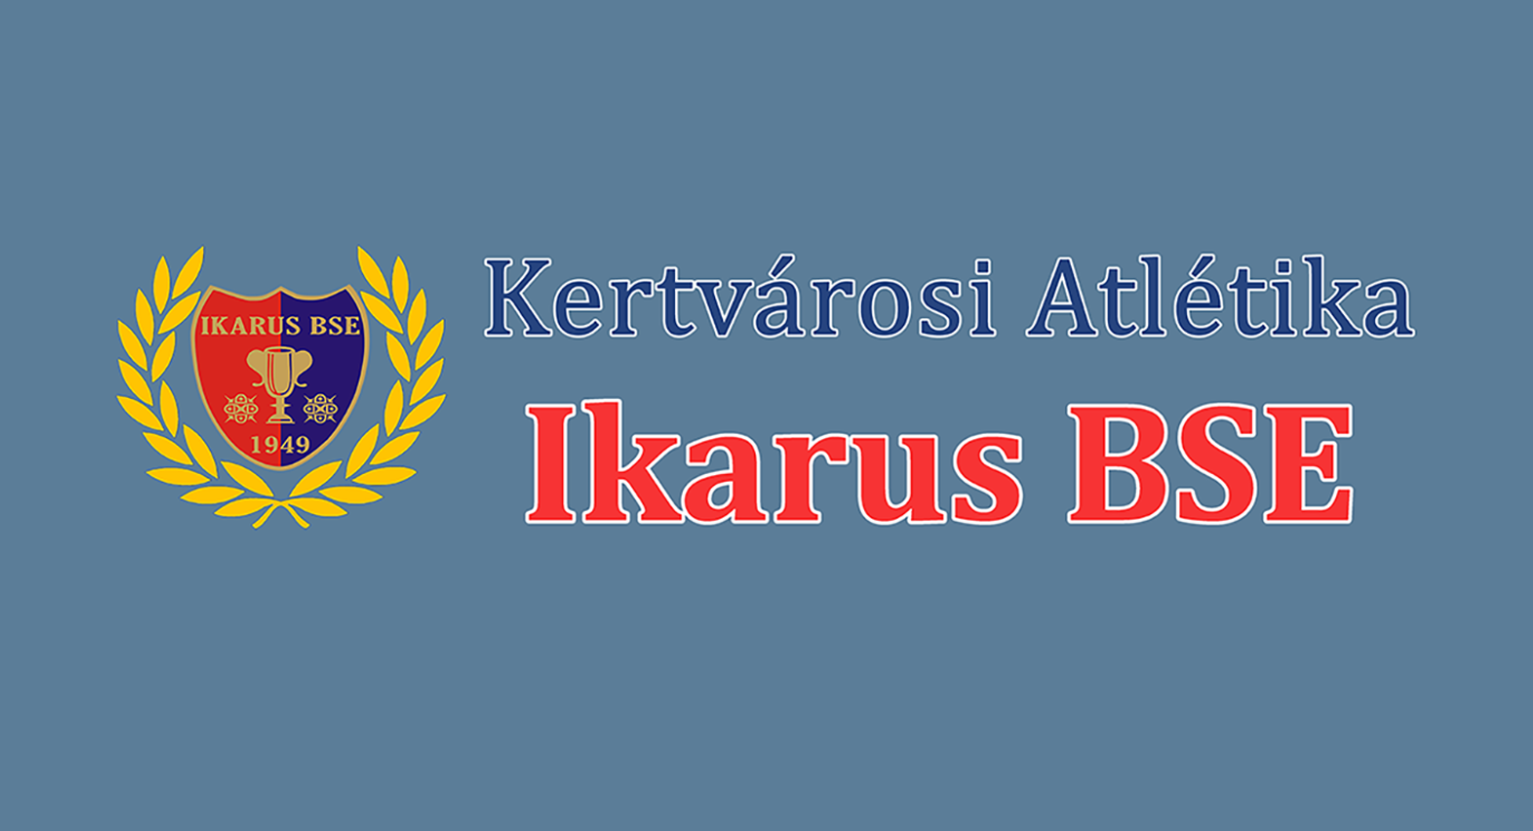 MEDITOP Pharmaceutical Ltd. has been a committed supporter of the Ikarus Athletics BSE athletes since 2004. The association currently has 400 athletes training under the guidance of 19 coaches.